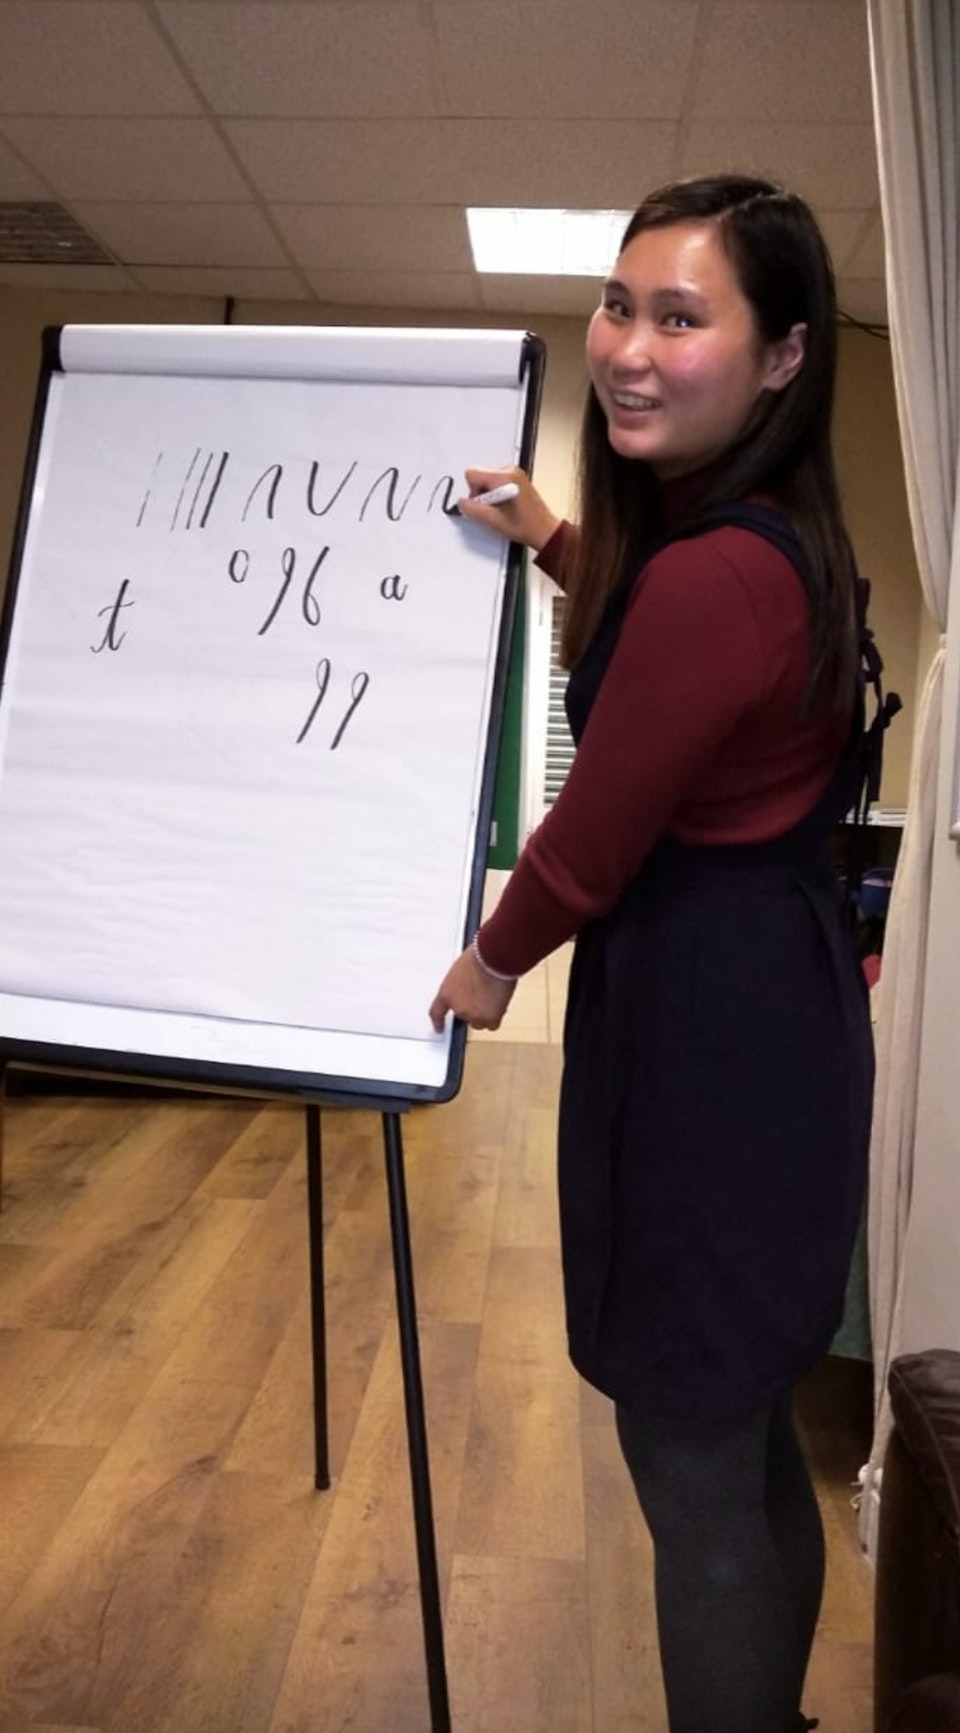 Brush lettering workshop - Teaching a brush lettering workshop at a local church in London as part of their community outreach programme of events